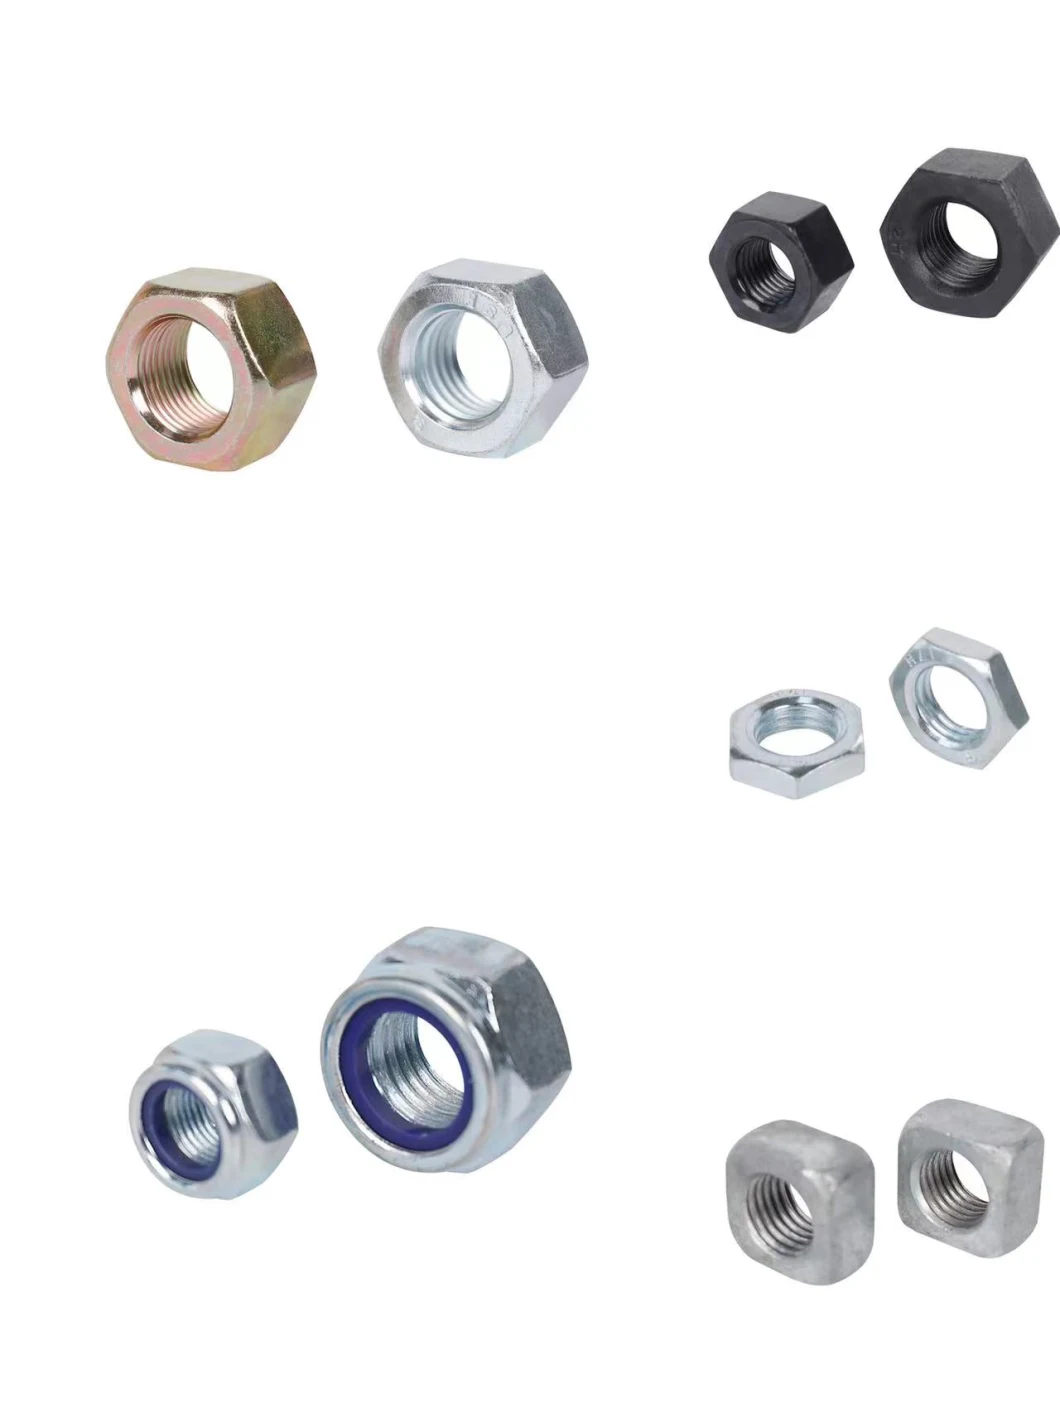 Wholesale Stainless Steel M8 M10 Toothed Lock K Cap Nut K Nuts Hex Kep Nut